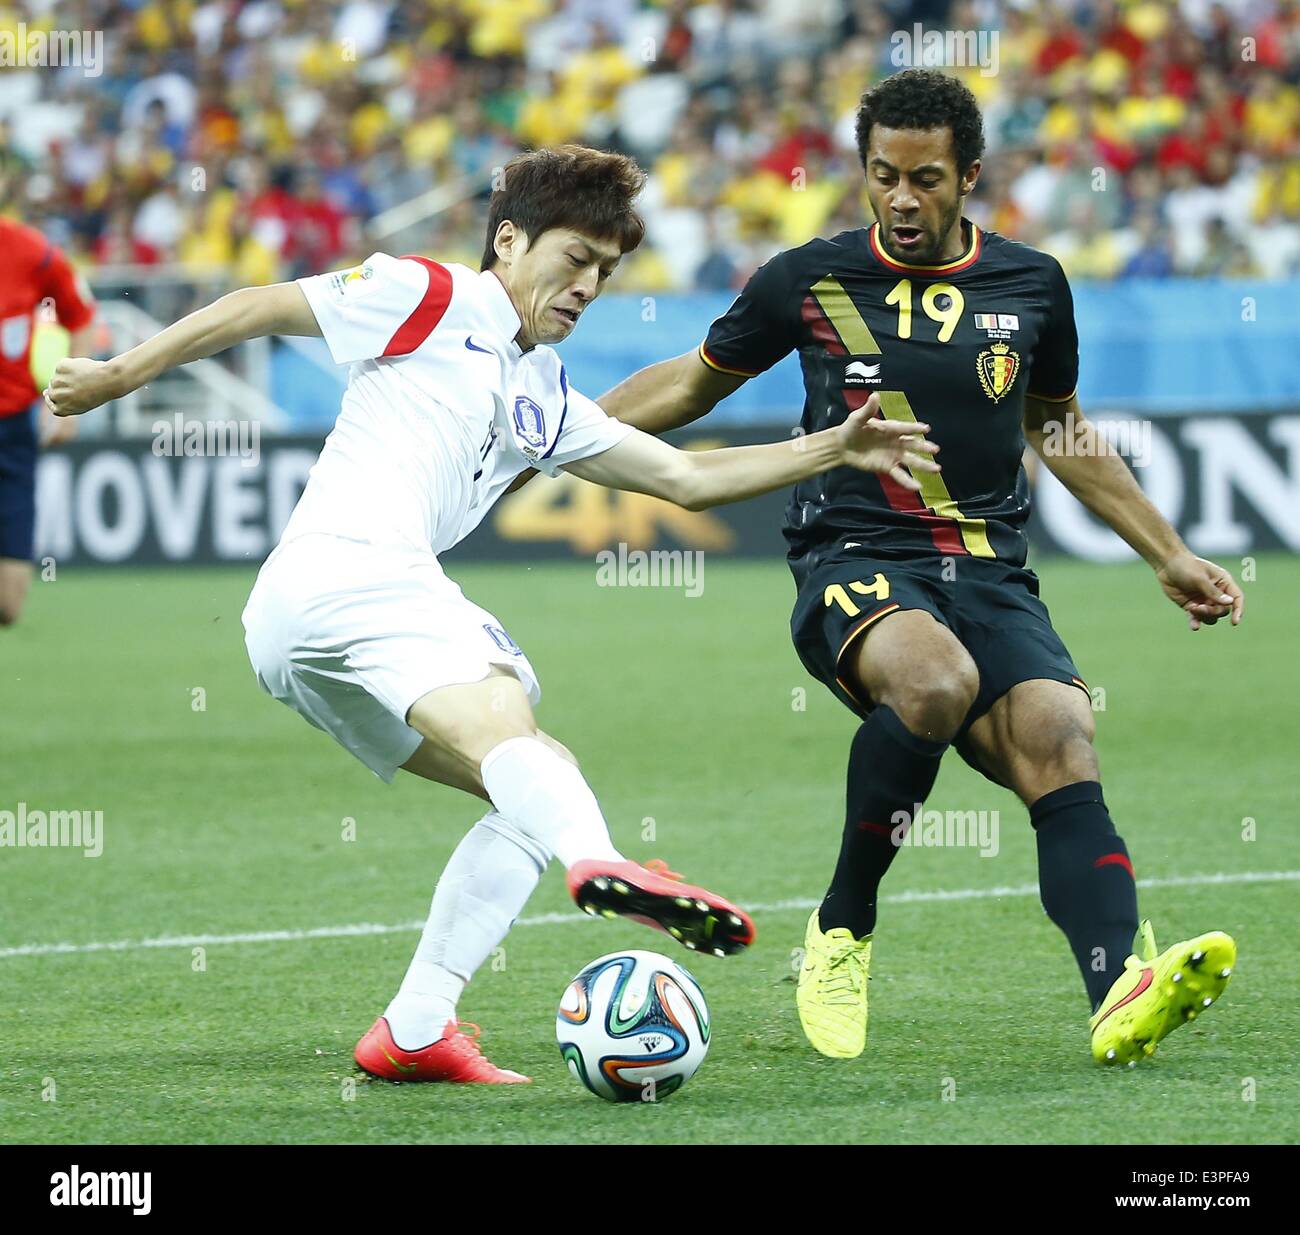 Sao Paulo, Brazil. 26th June, 2014. Belgium's Mousa Dembele (R) competes with South Korea's Lee Chung Yong during a Group H match between South Korea and Belgium of 2014 FIFA World Cup at the Arena de Sao Paulo Stadium in Sao Paulo, Brazil, on June 26, 2014. Credit:  Chen Jianli/Xinhua/Alamy Live News Stock Photo